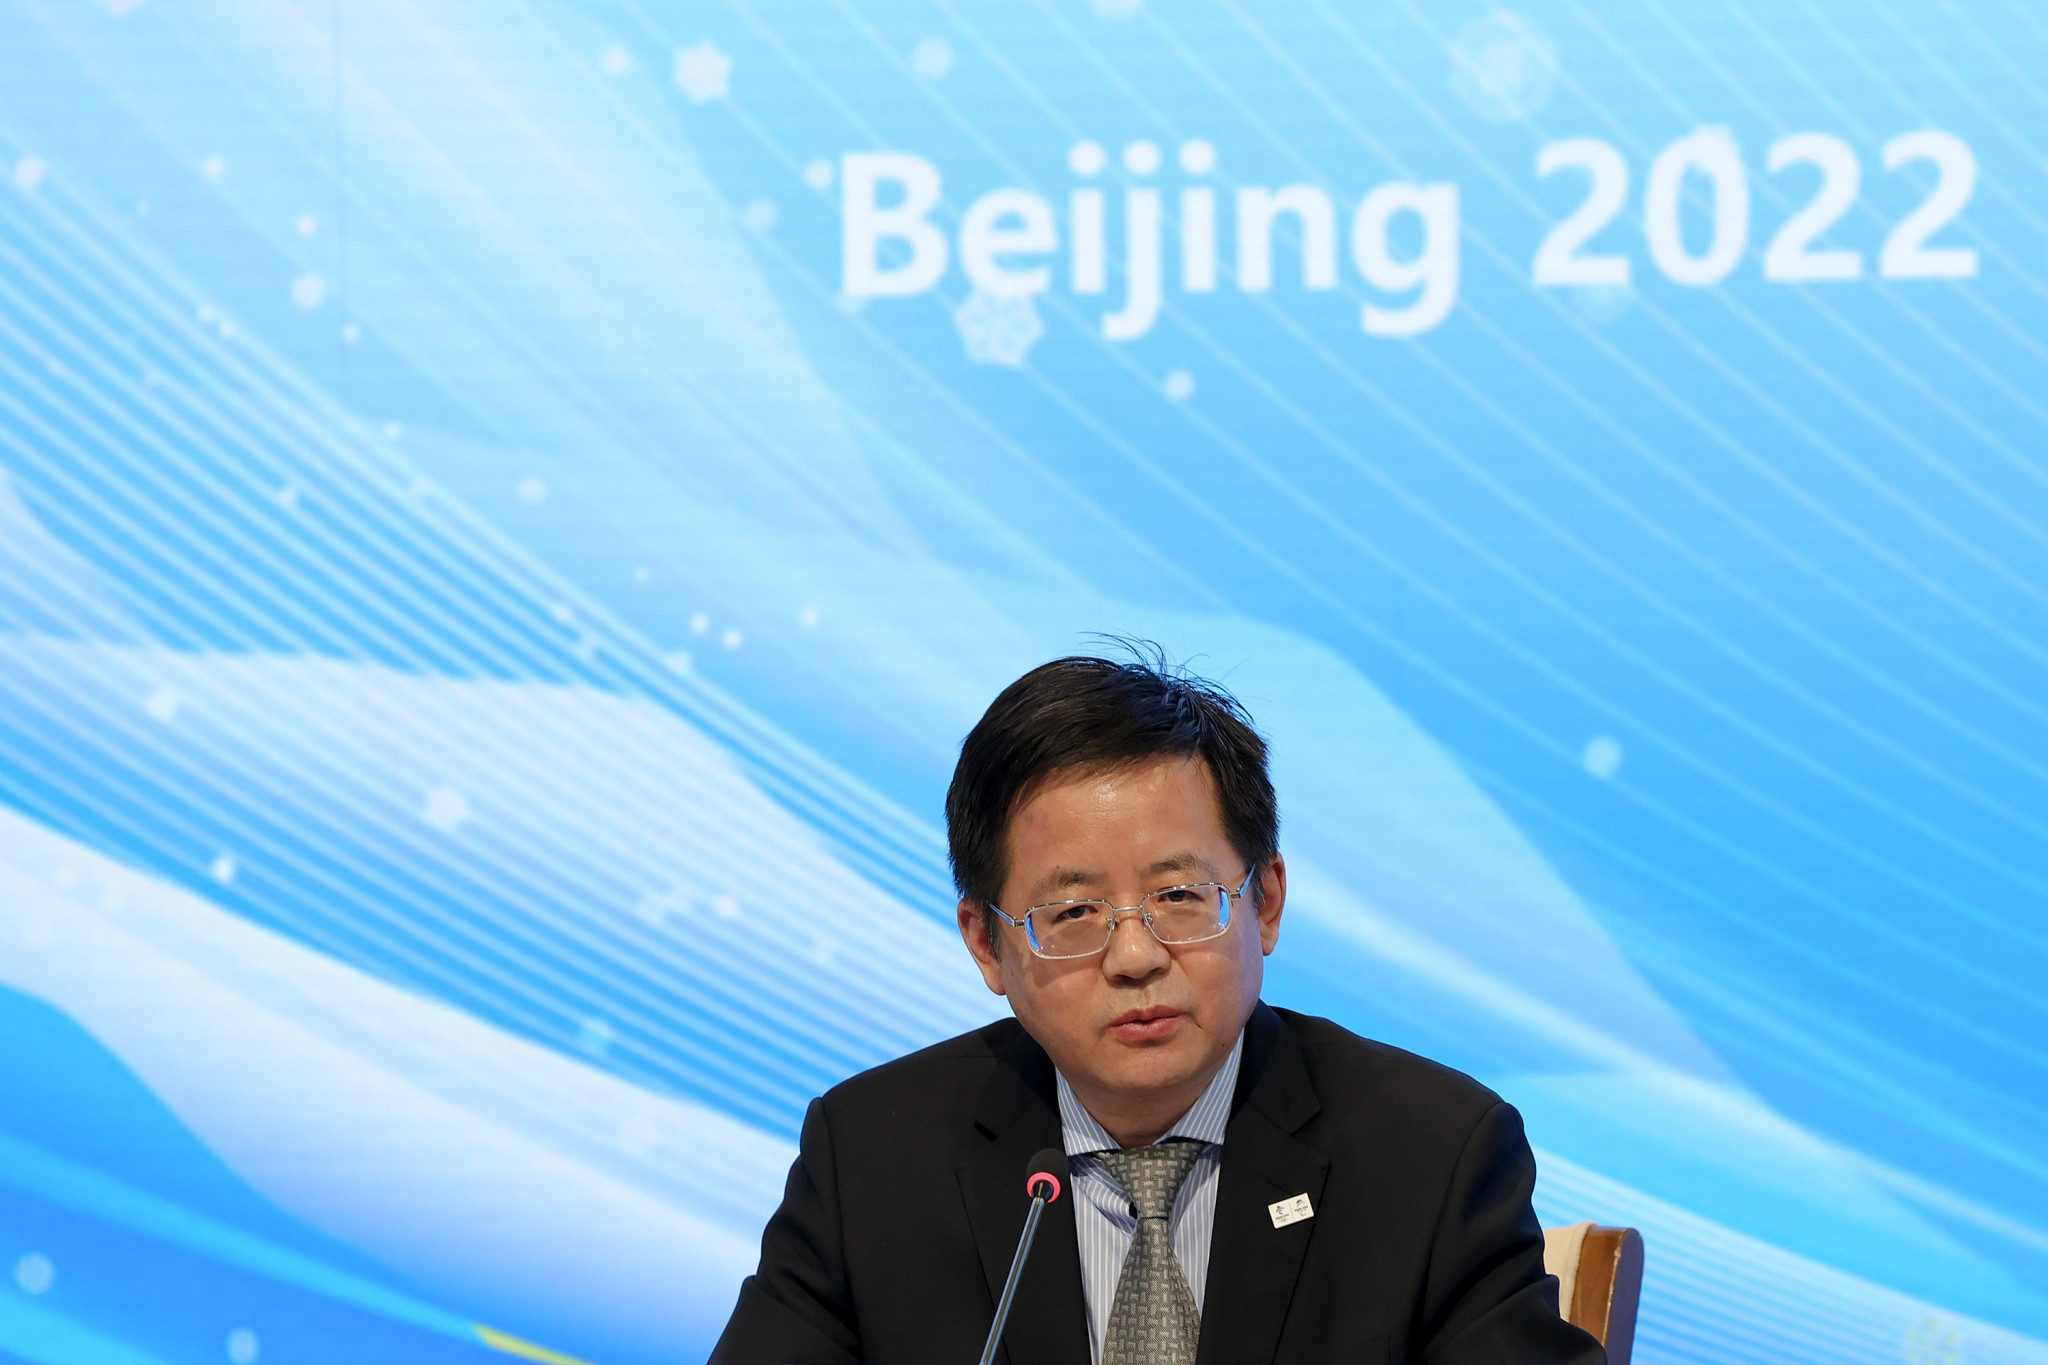 Beijing 2022 spokesperson Zhao Weidong claimed the Winter Olympic and Paralympic Games would not have taken place without the adoption of the closed-loop system ©Getty Images